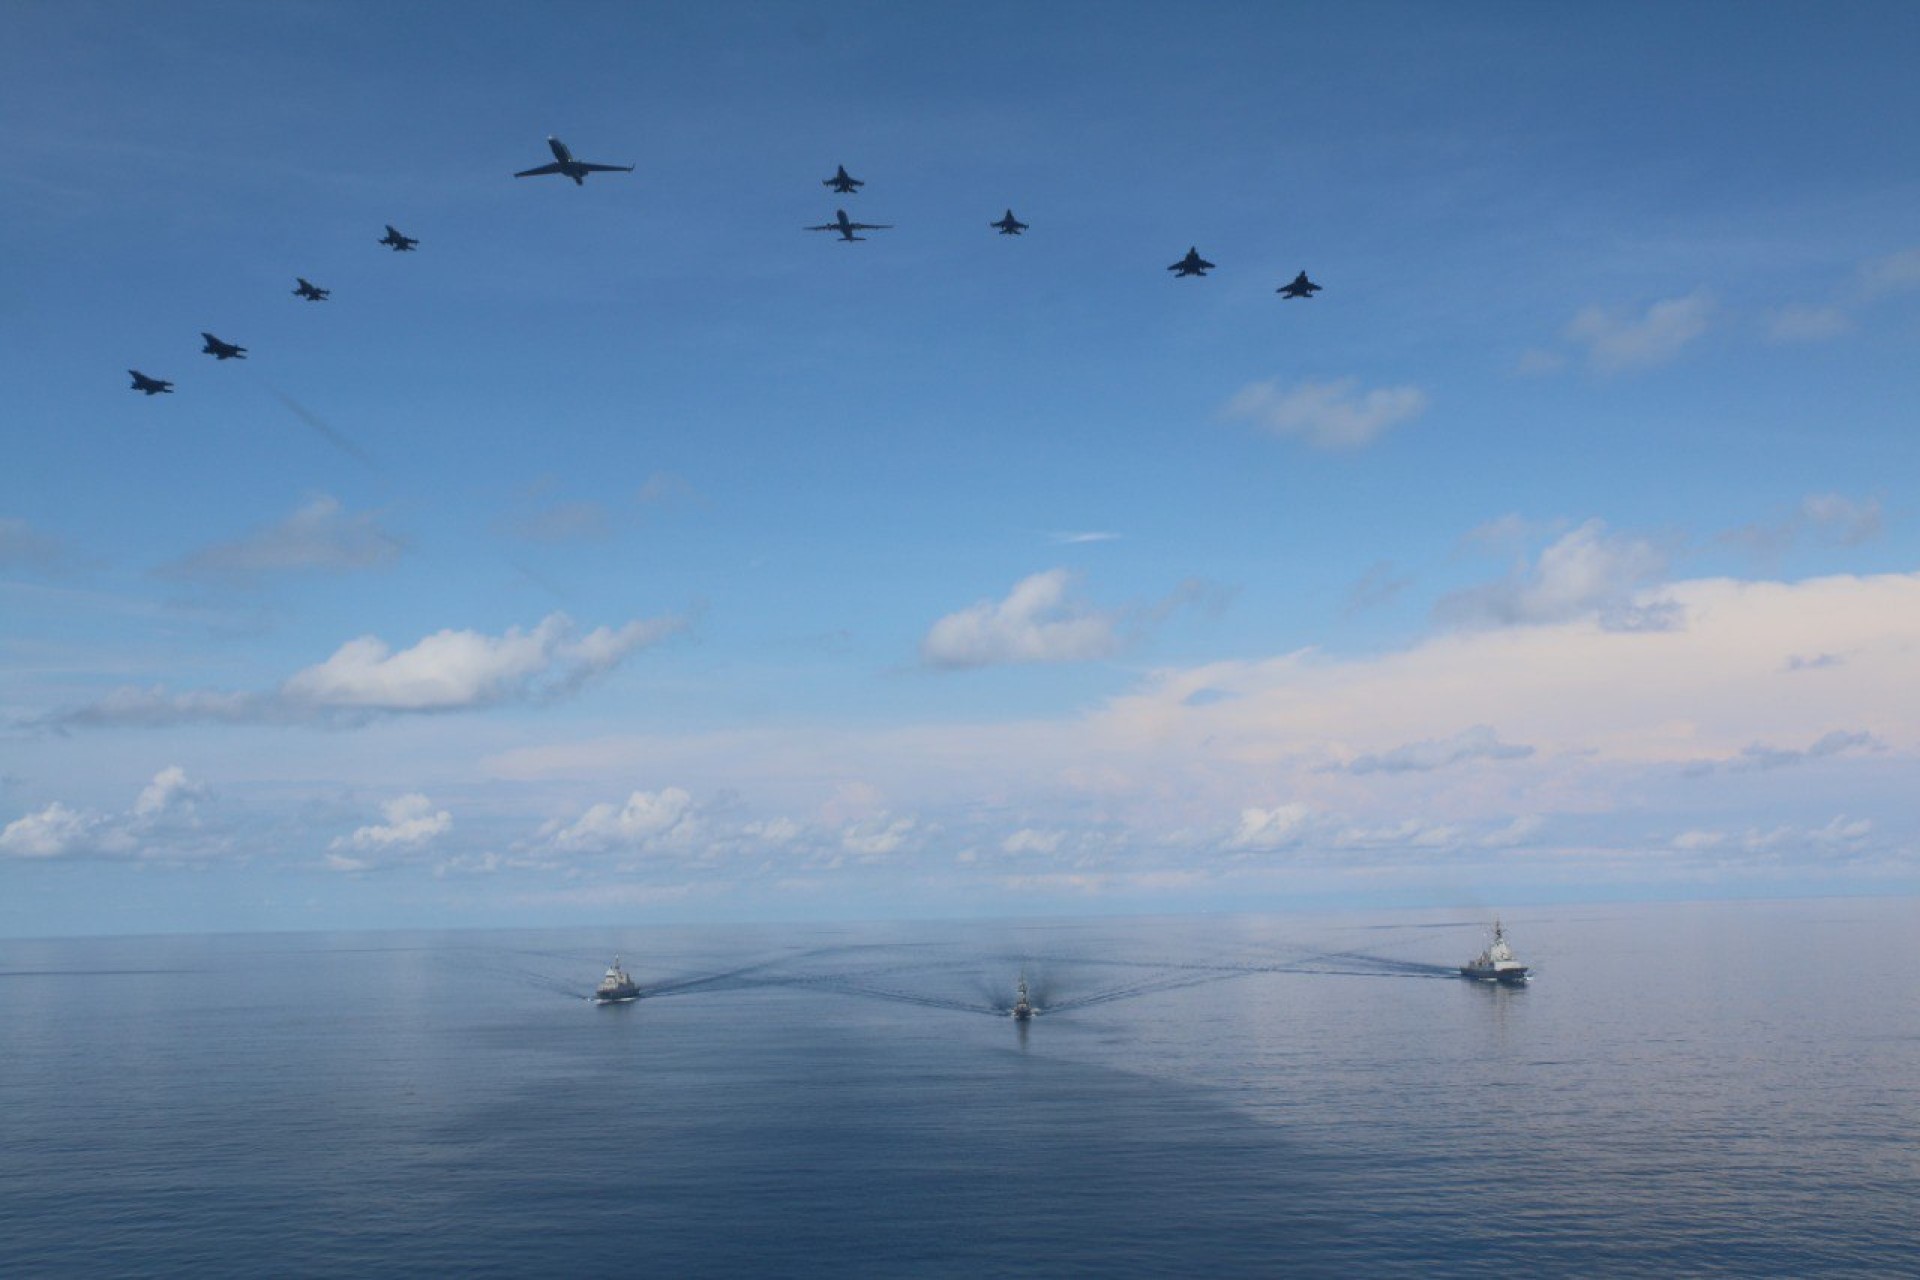 RSS Steadfast, RSS Valour, and HMAS Hobart (left to right) together with participating RSAF aircraft during Exercise Singaroo. 